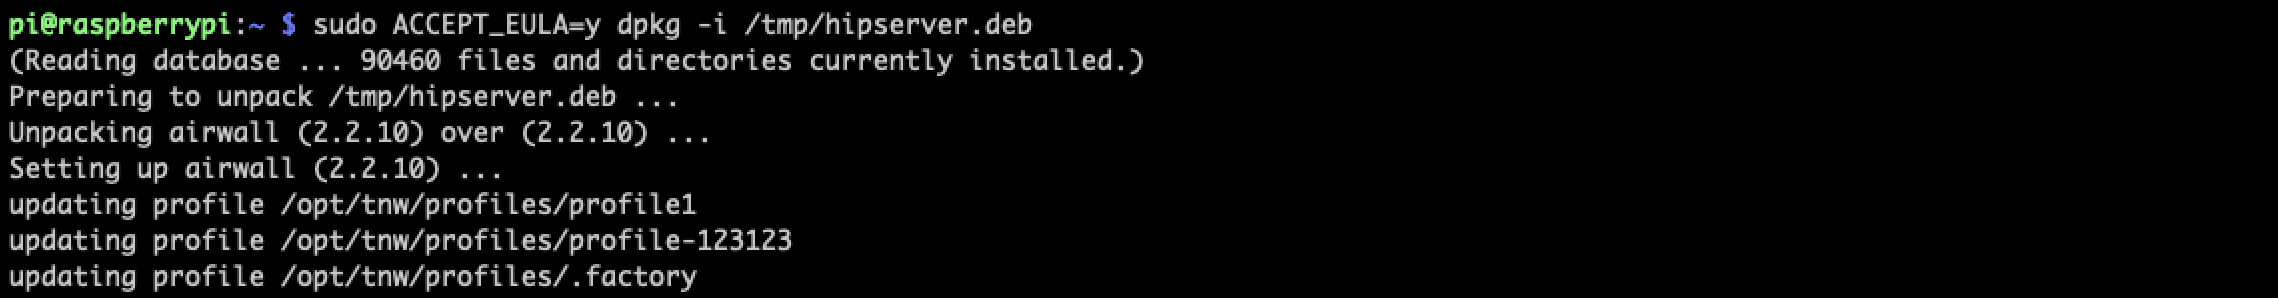 sudo ACCEPT command and results in a terminal window